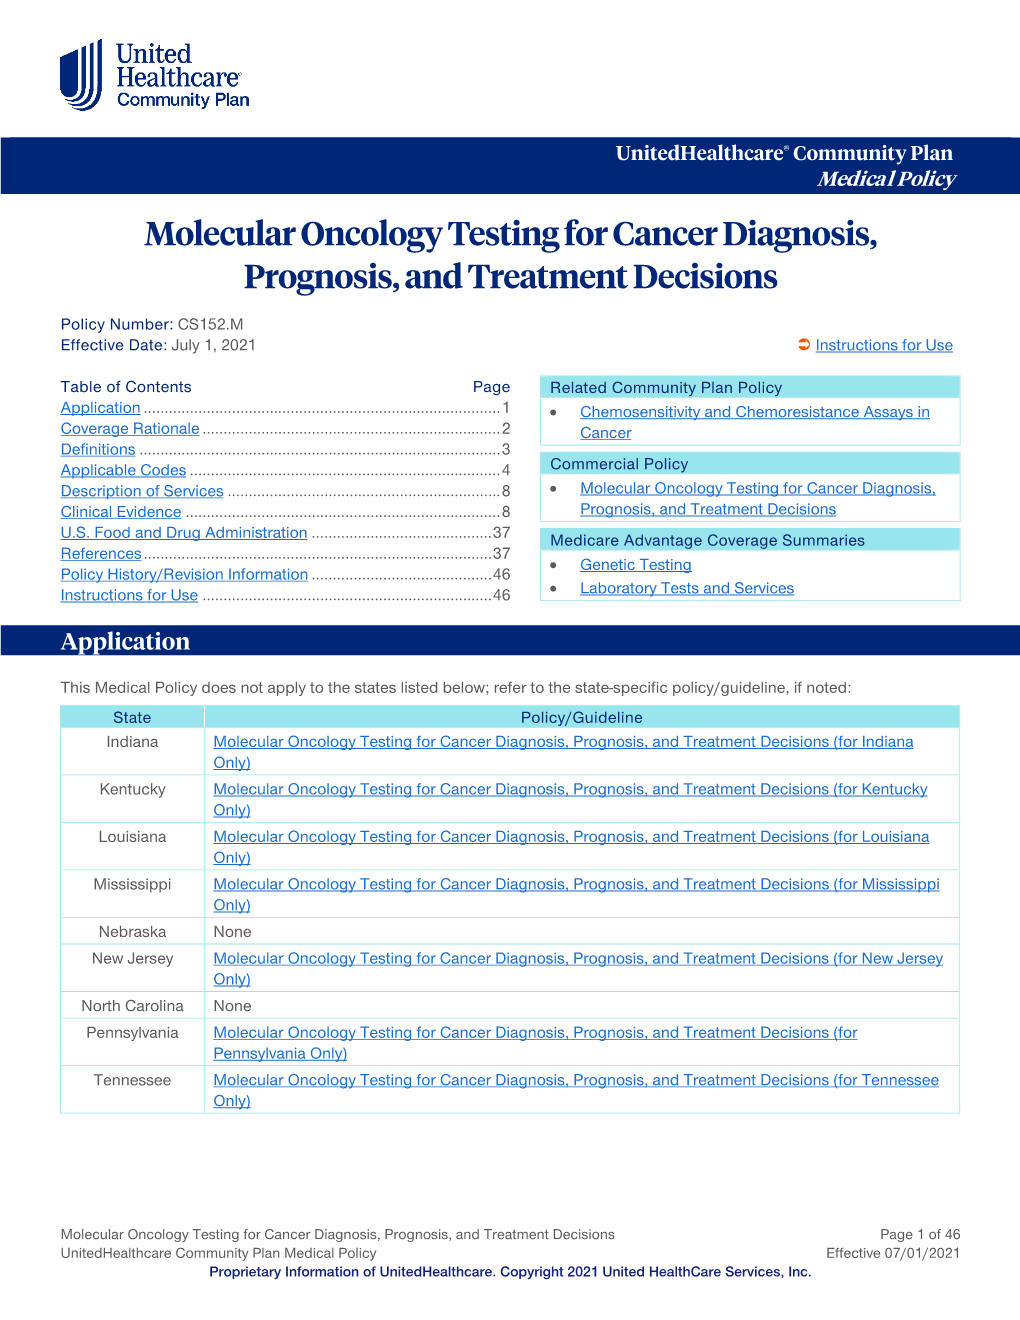 Molecular Oncology Testing for Cancer Diagnosis, Prognosis, and Treatment Decisions